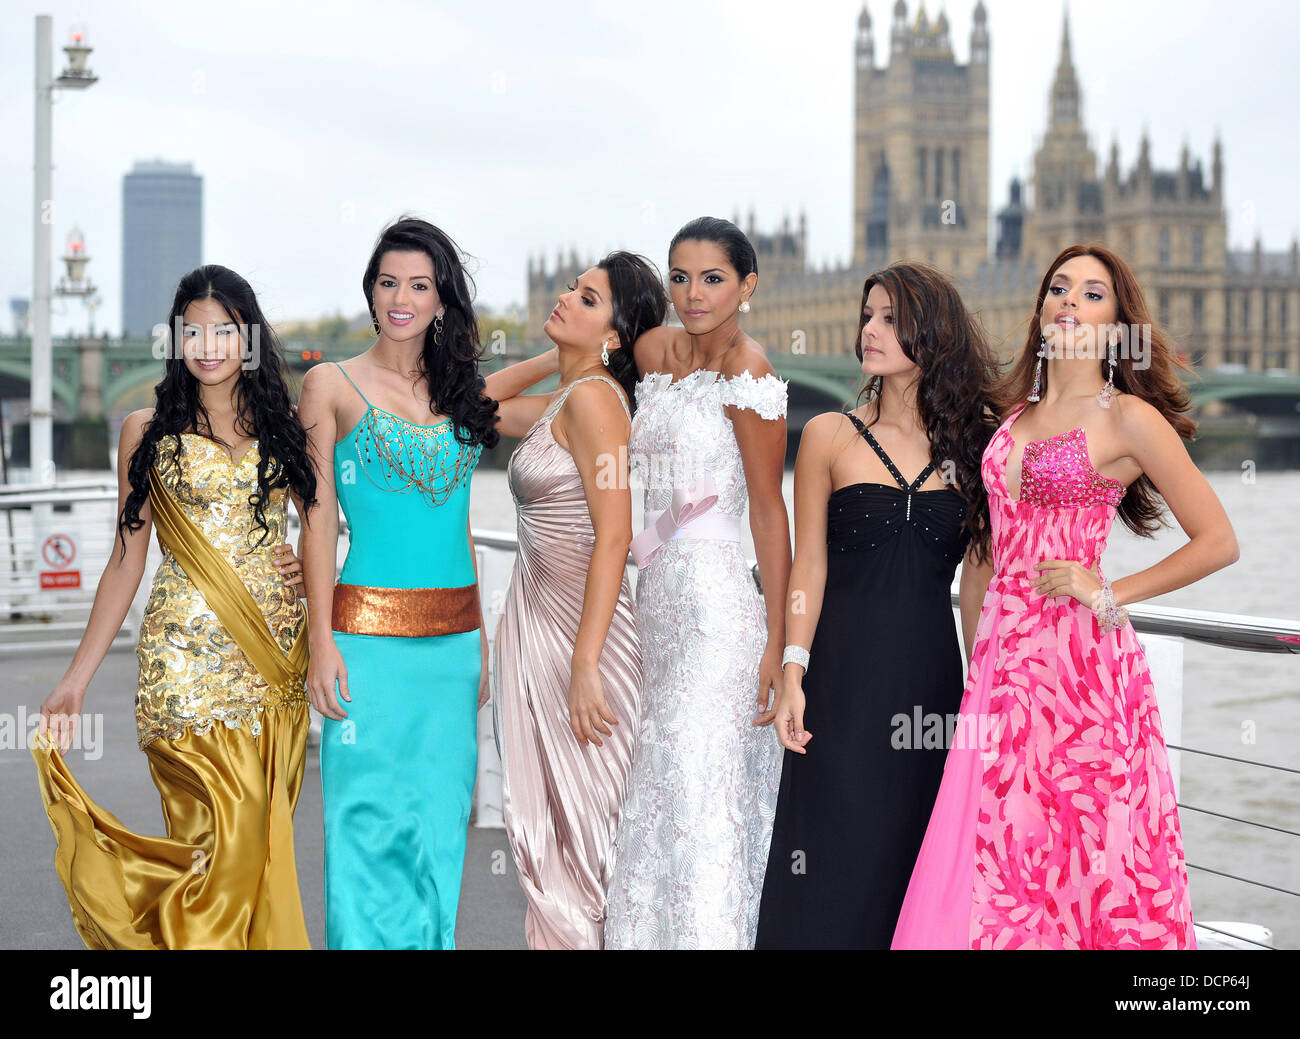 Miss Argentina, Miss Brazil, Miss Chile, Miss Venezuela, Miss Columbia Miss World - photocall held at the London Eye Pier. London, England - 31.10.11 Stock Photo